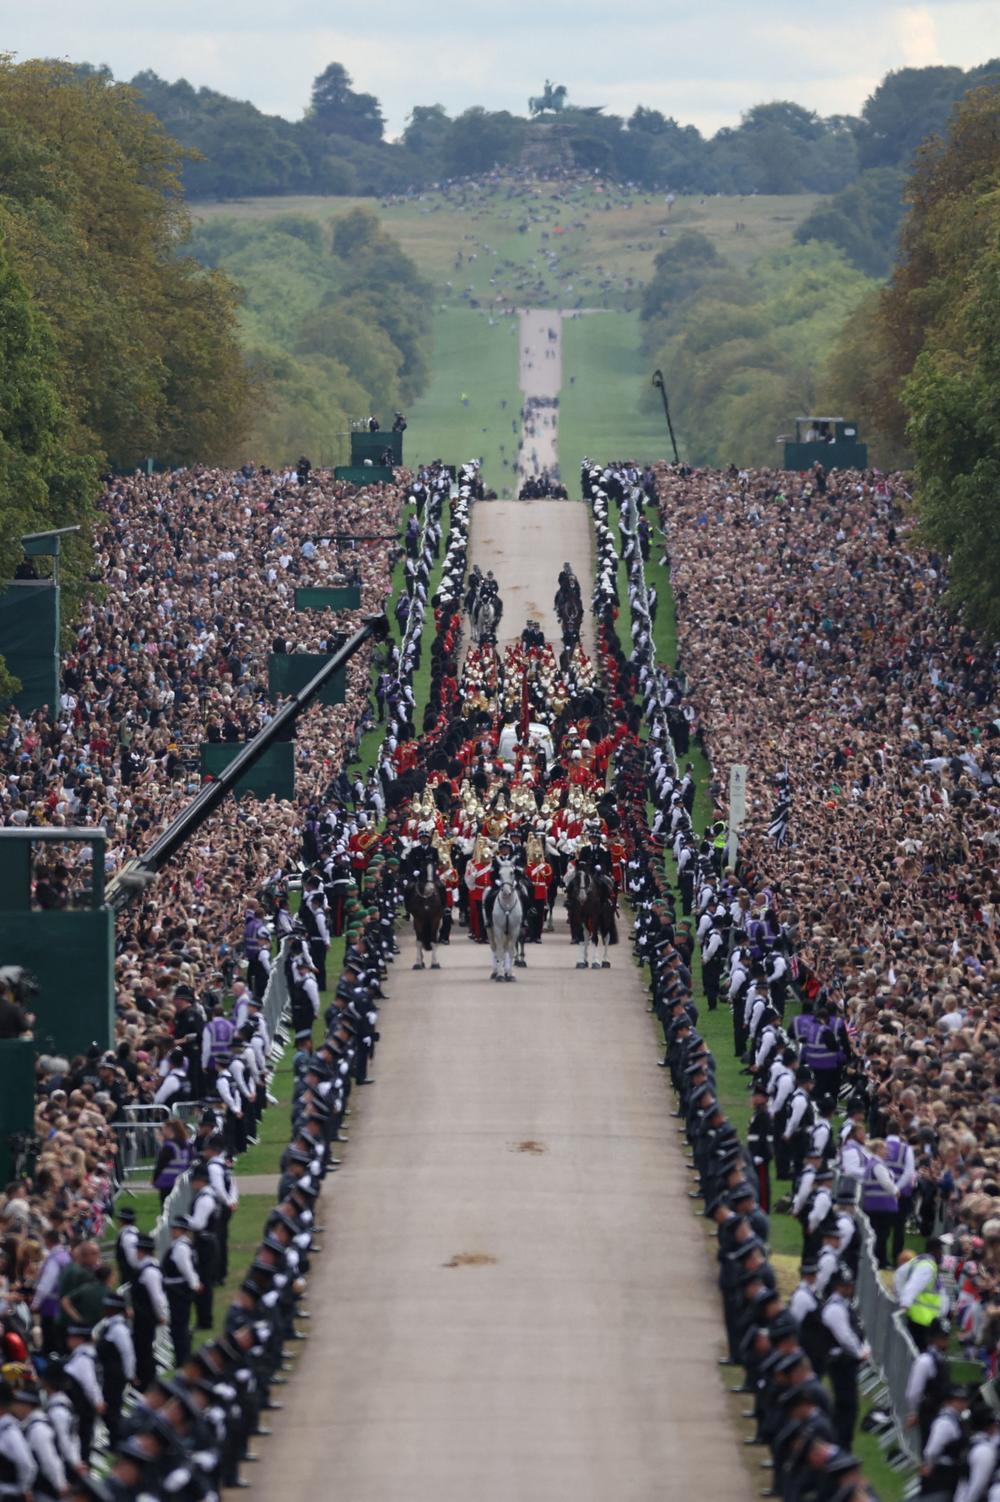 The procession following the coffin of Queen Elizabeth II, aboard the State Hearse, travels up The Long Walk in Windsor on Monday, making its final journey to Windsor Castle after the State Funeral Service.